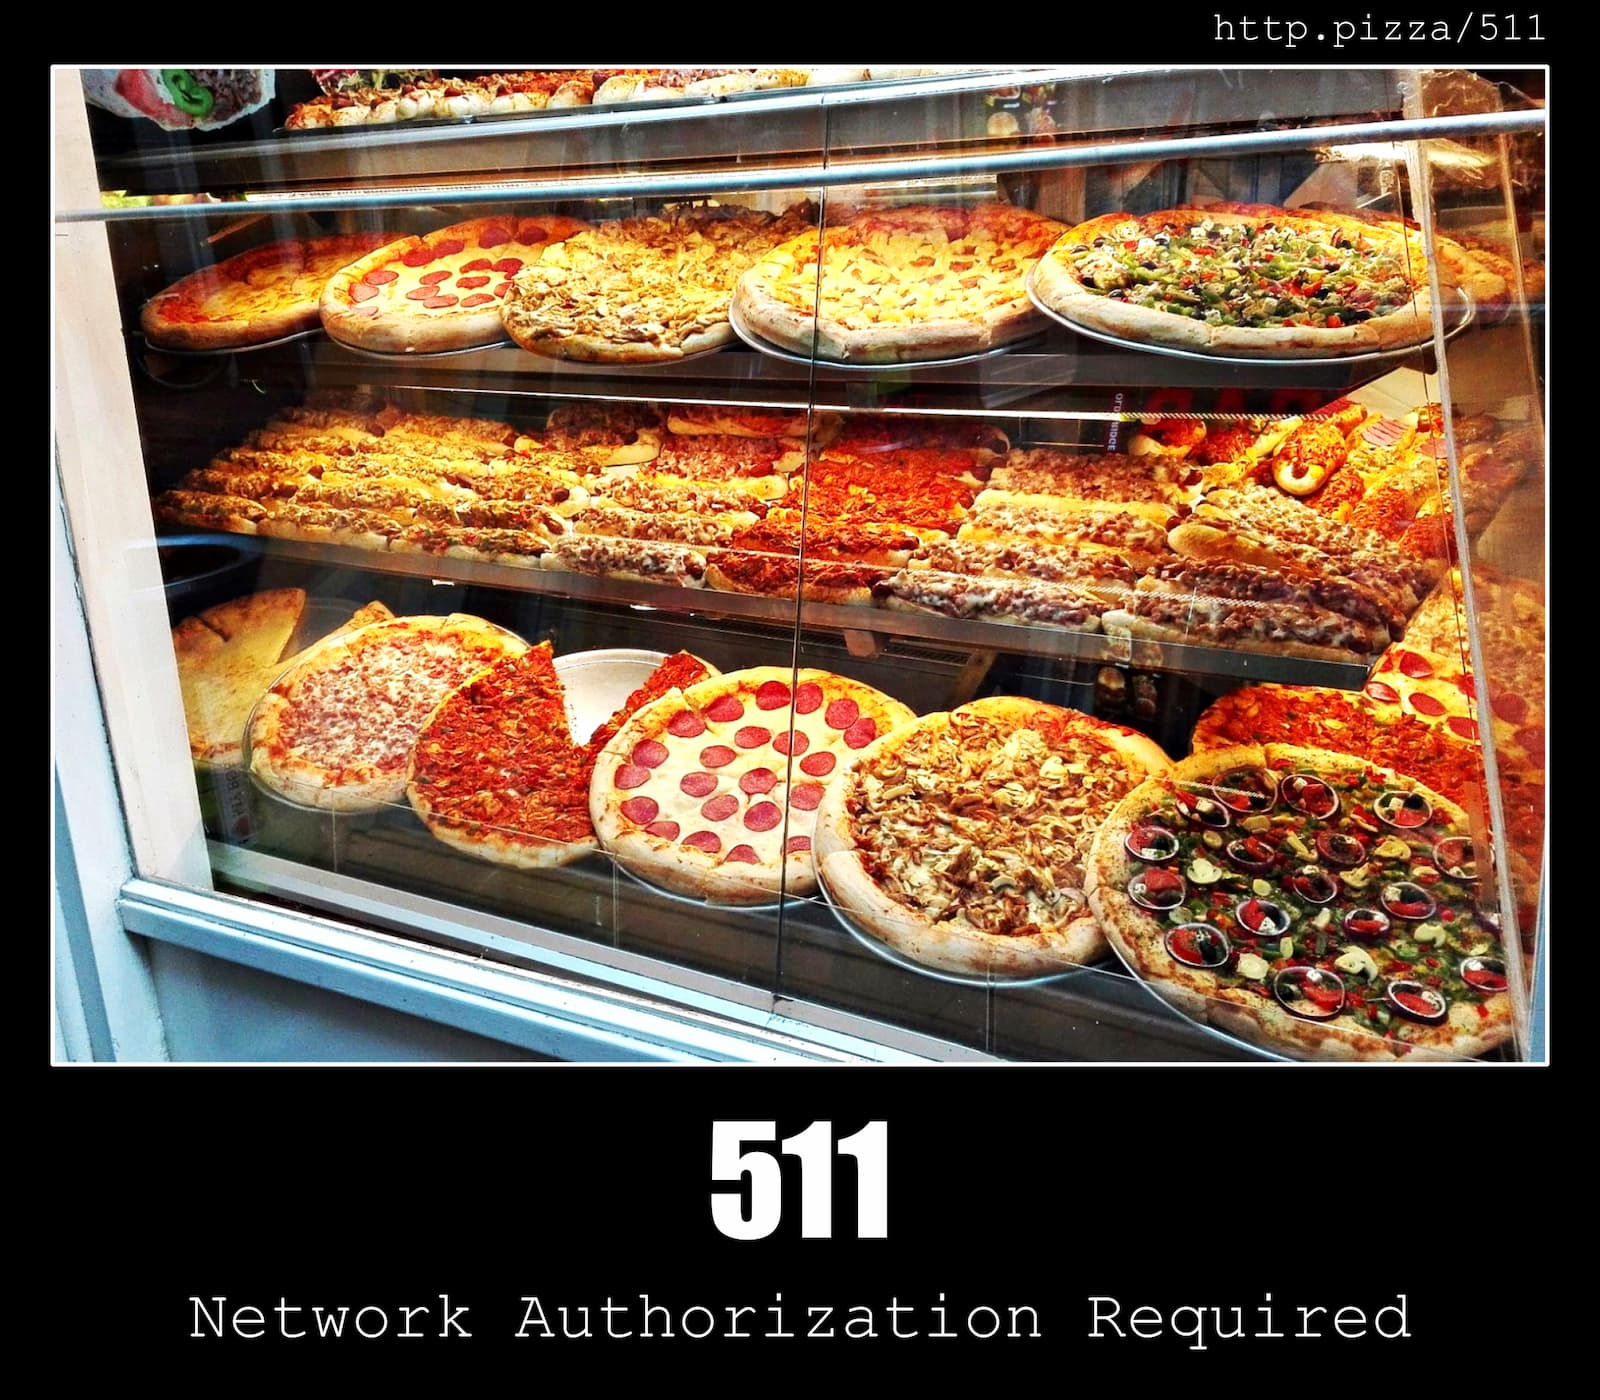 HTTP Status Code 511 Network Authentication Required & Pizzas